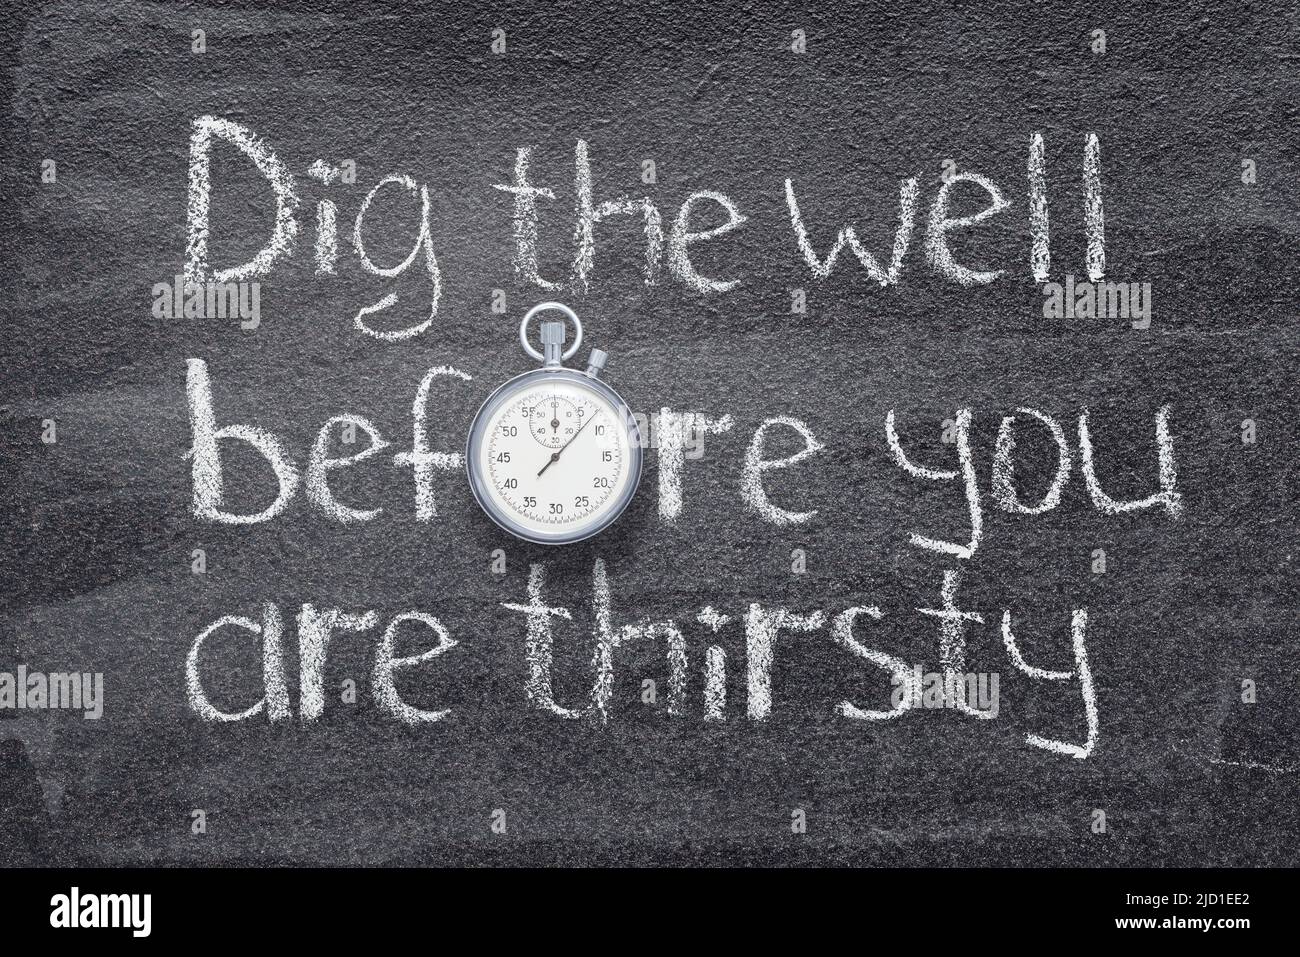 Dig the well before you are thirsty Chinese proverb written on chalkboard with vintage precise stopwatch Stock Photo